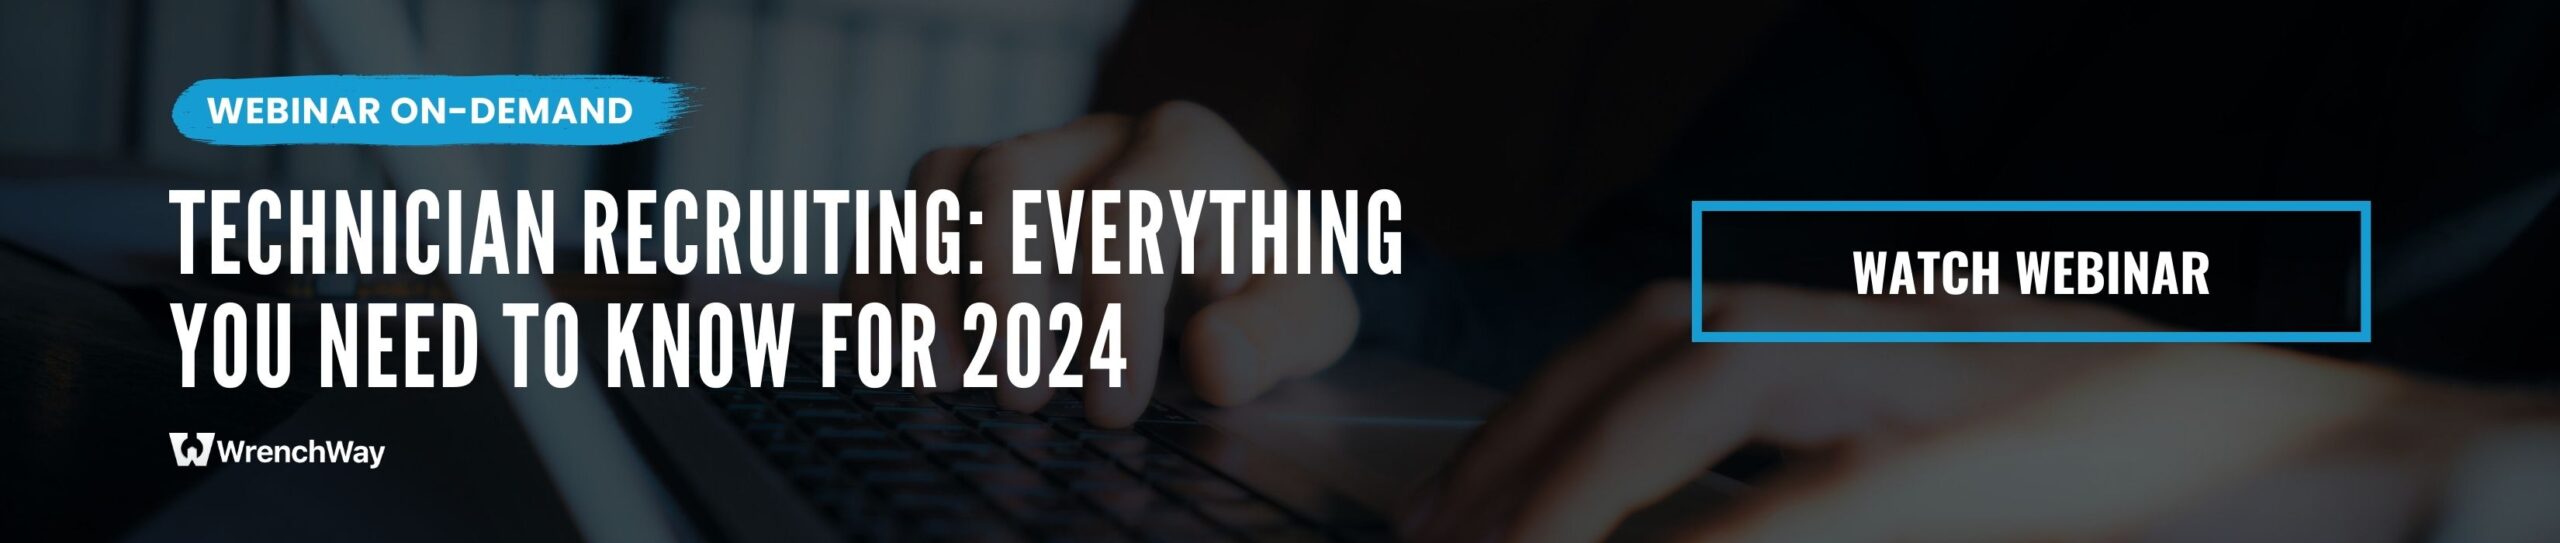 Download the webinar, Technician Recruiting: Everything You Need to Know for 2024